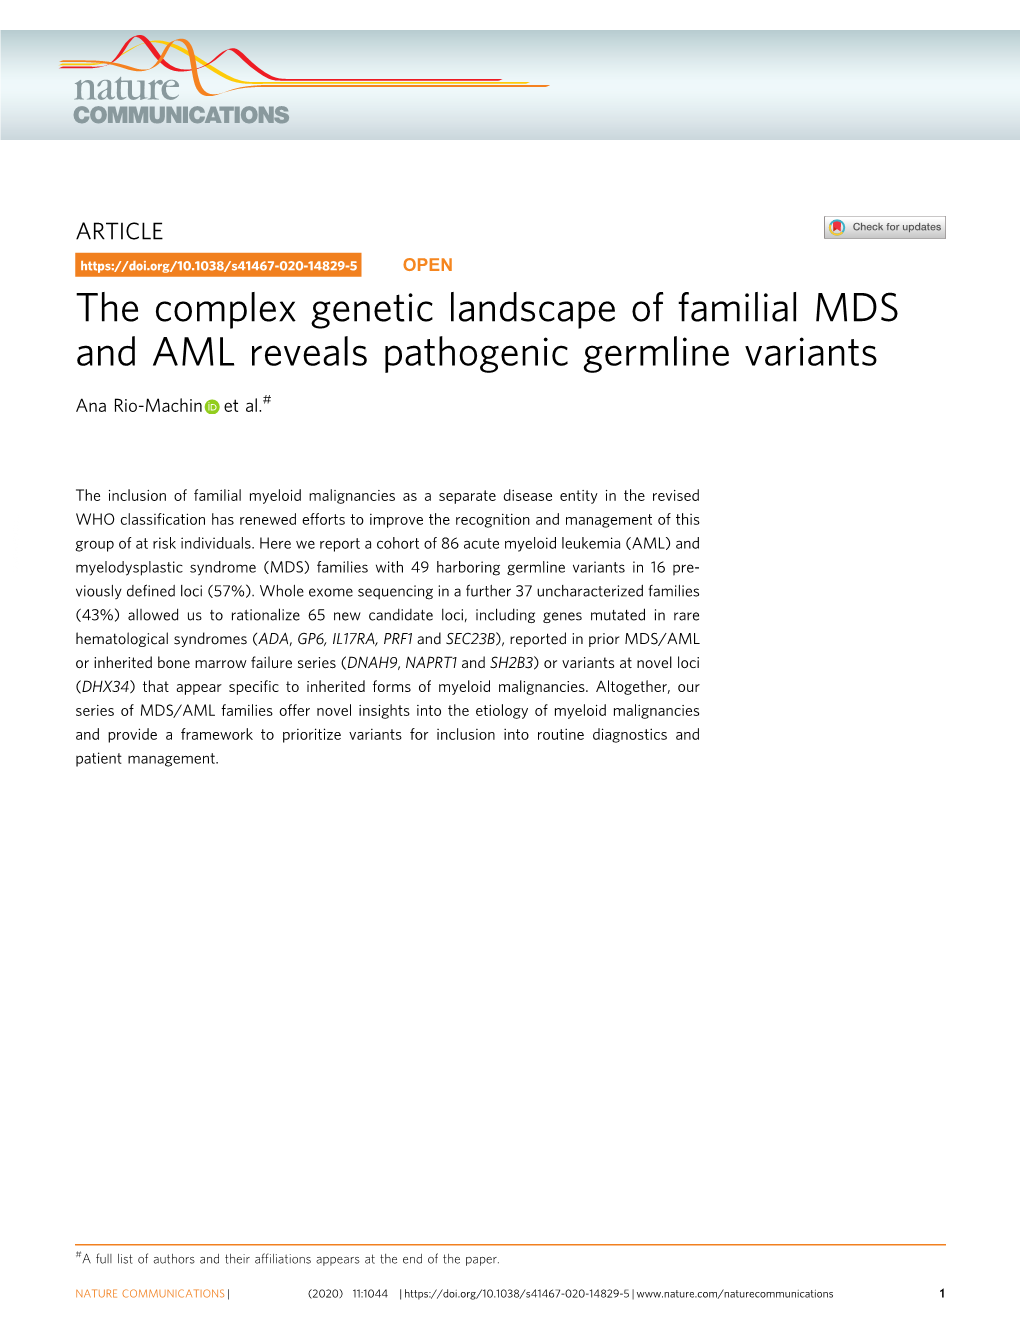 The Complex Genetic Landscape of Familial MDS and AML Reveals Pathogenic Germline Variants